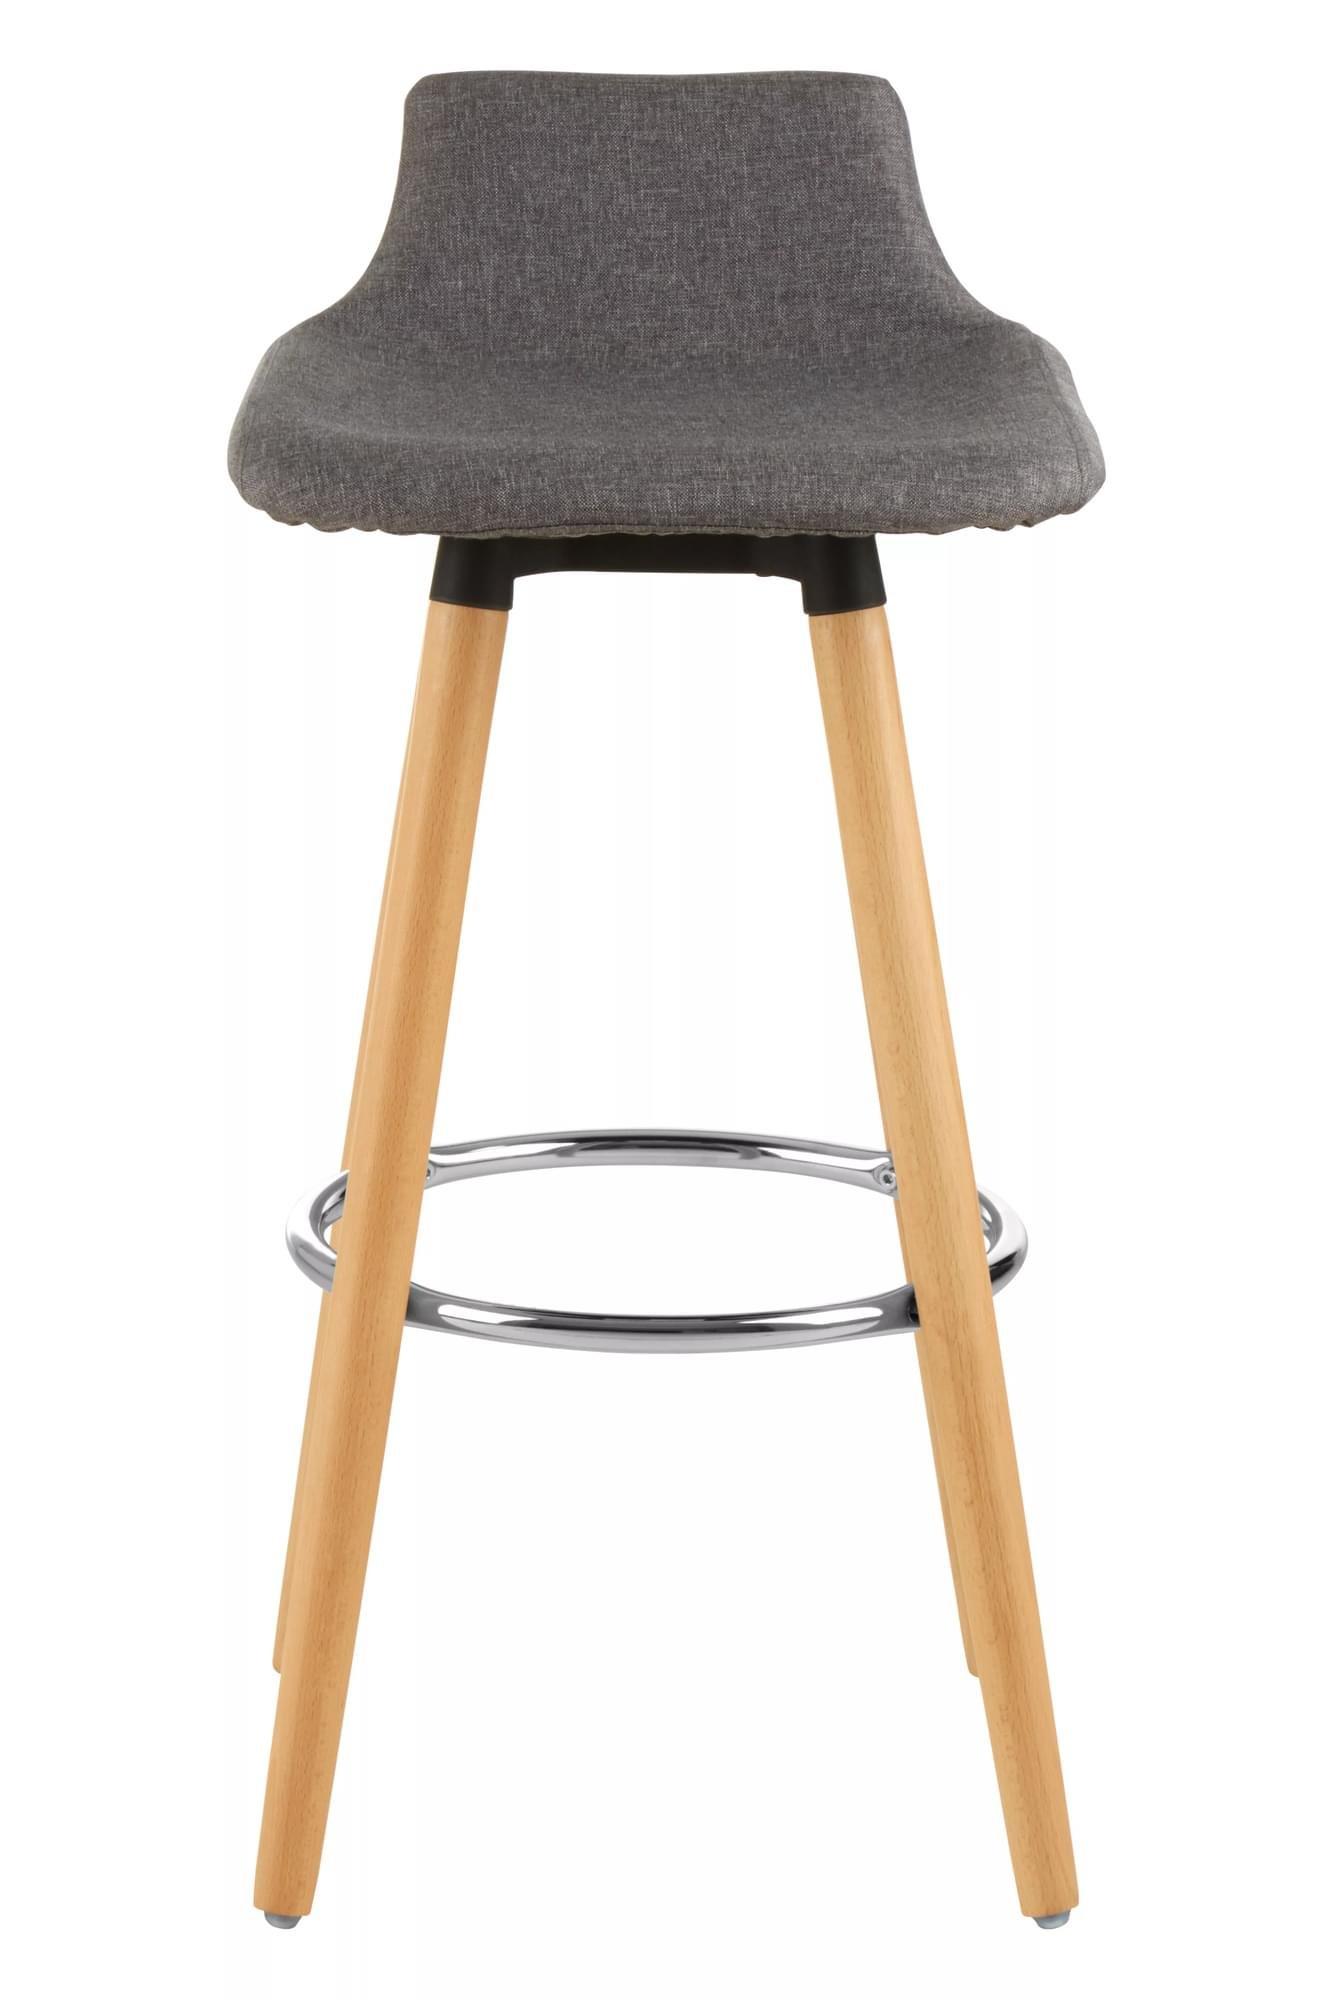 Interiors by Premier Black Bar Stool, Comfortable Seating Breakfast Bar Stool, Space-Saver Kitchen S